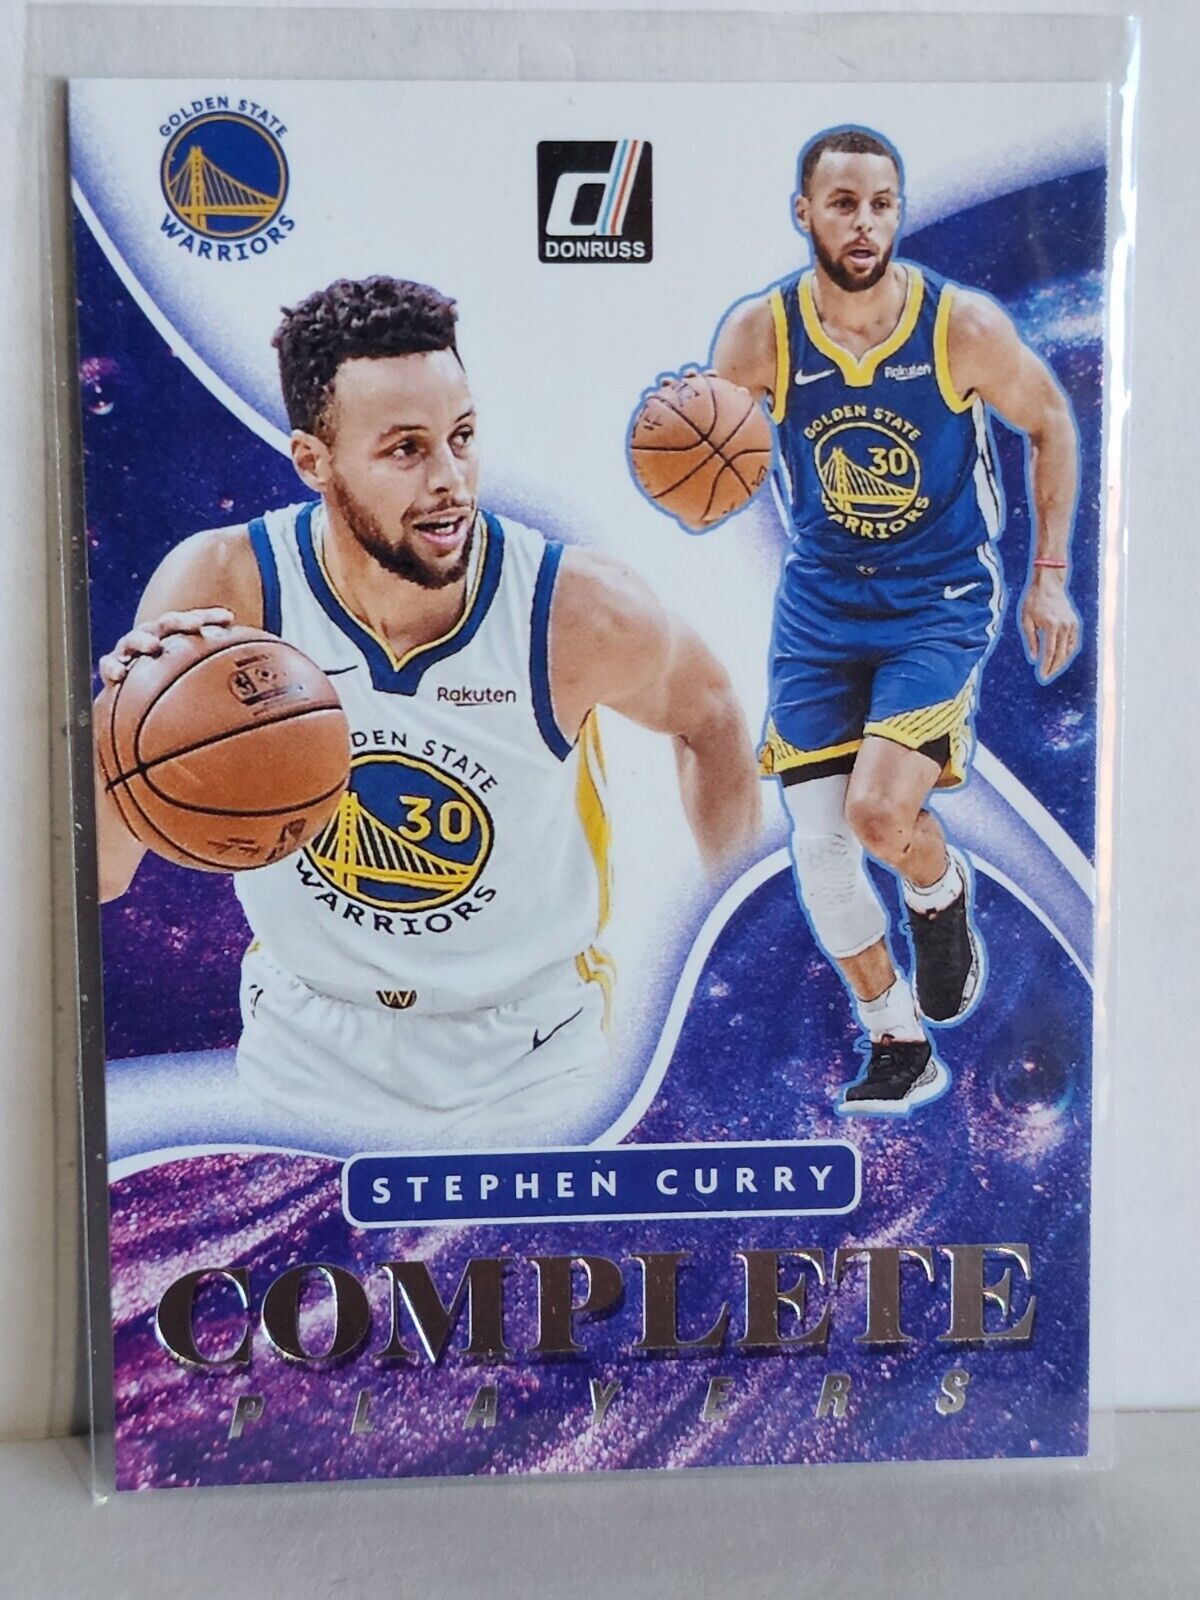 Stephen Curry 2021 2022 Donruss Complete Players Basketball Series Mint  Insert Card #7 Picturing Him in His White and Blue Golden State Warriors